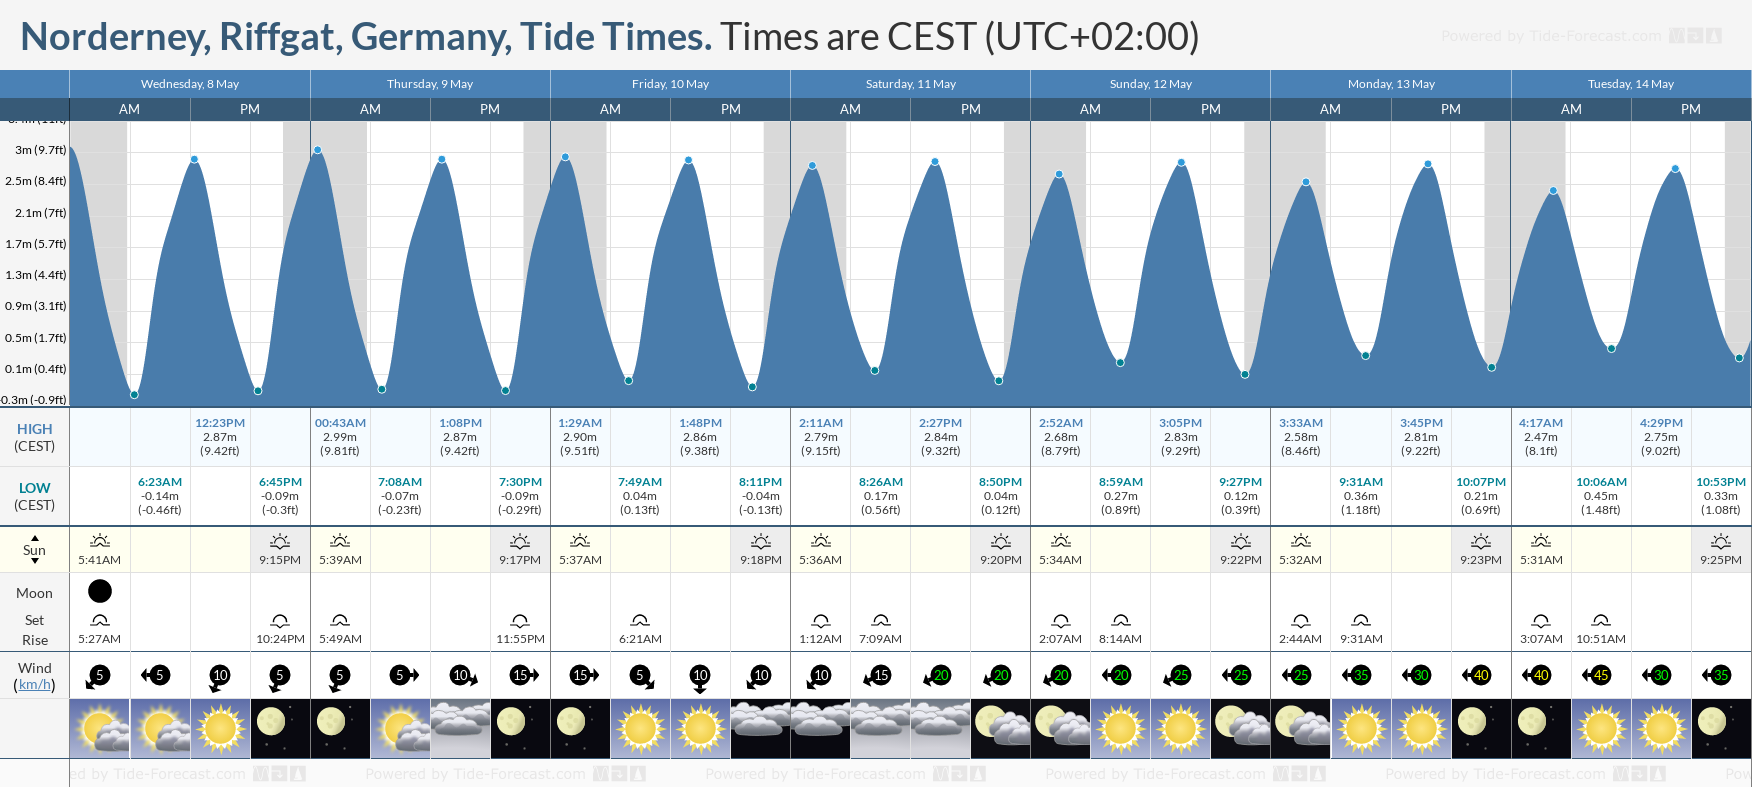 Norderney, Riffgat, Germany Tide Chart including high and low tide tide times for the next 7 days